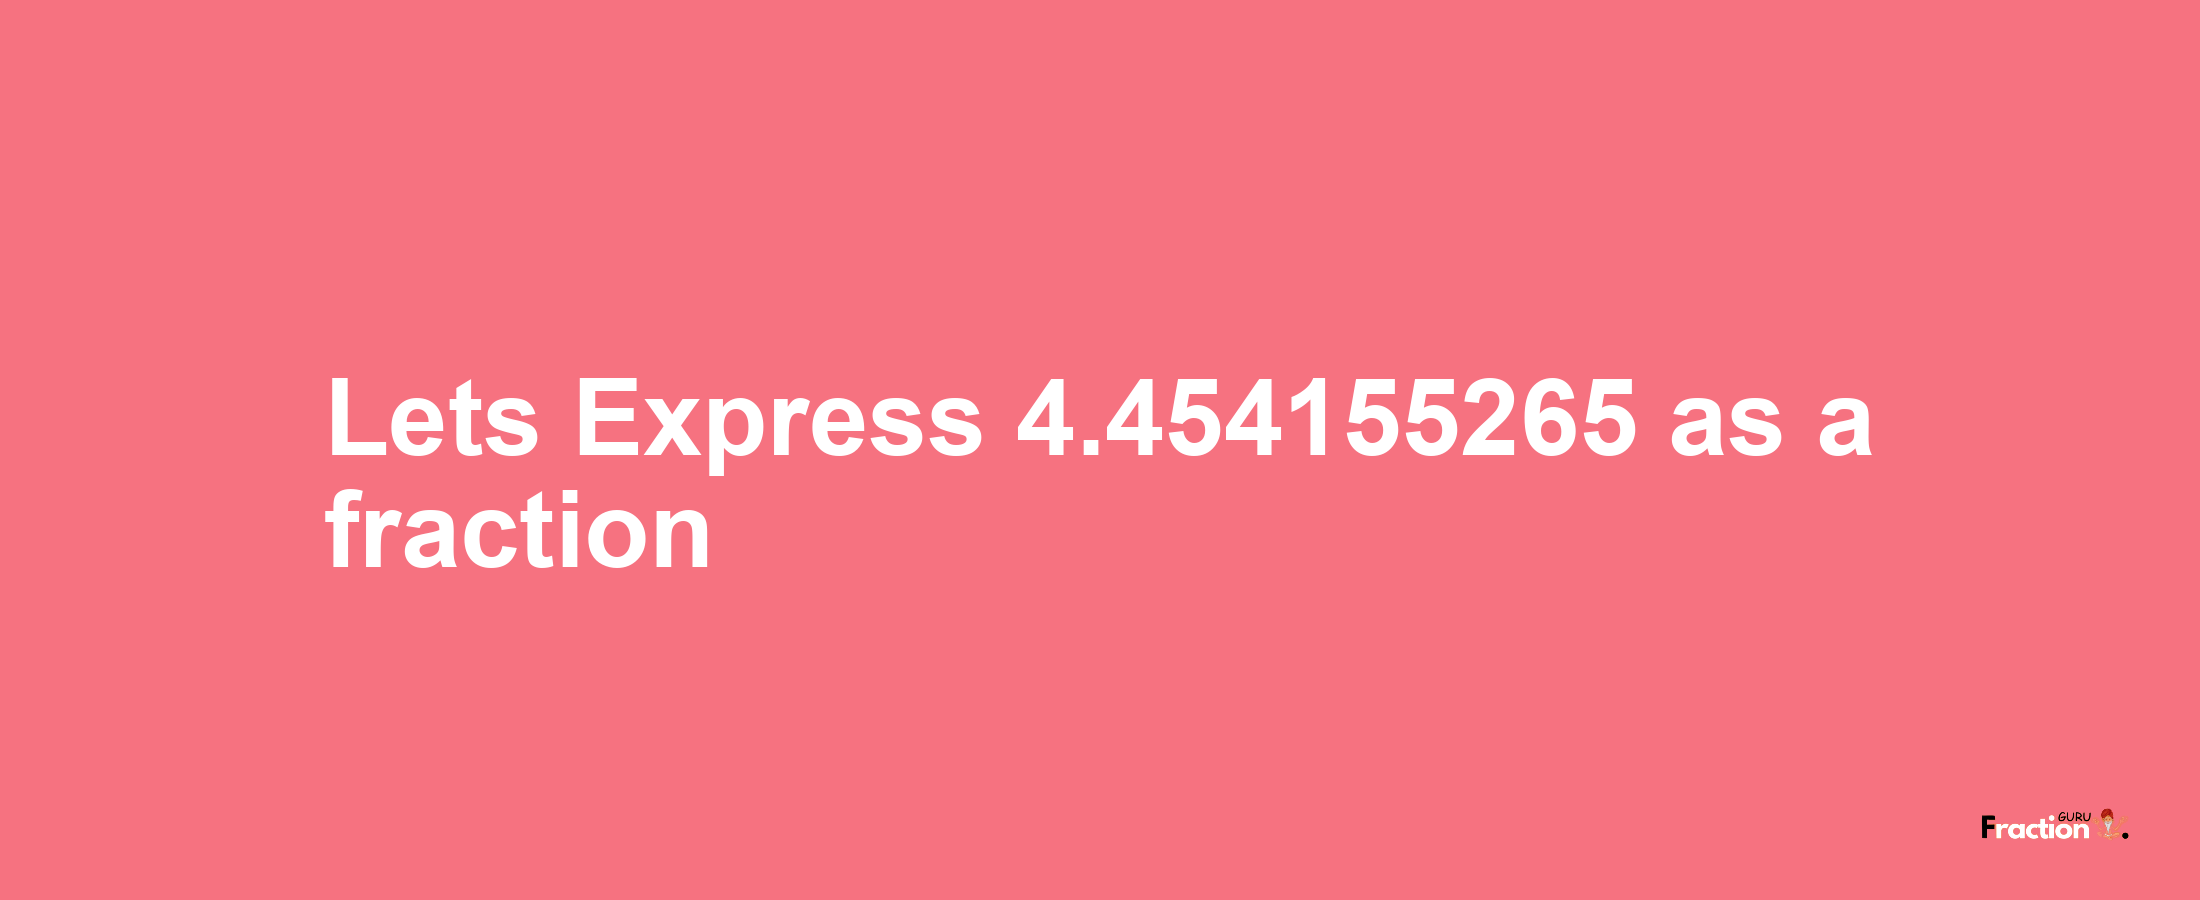 Lets Express 4.454155265 as afraction